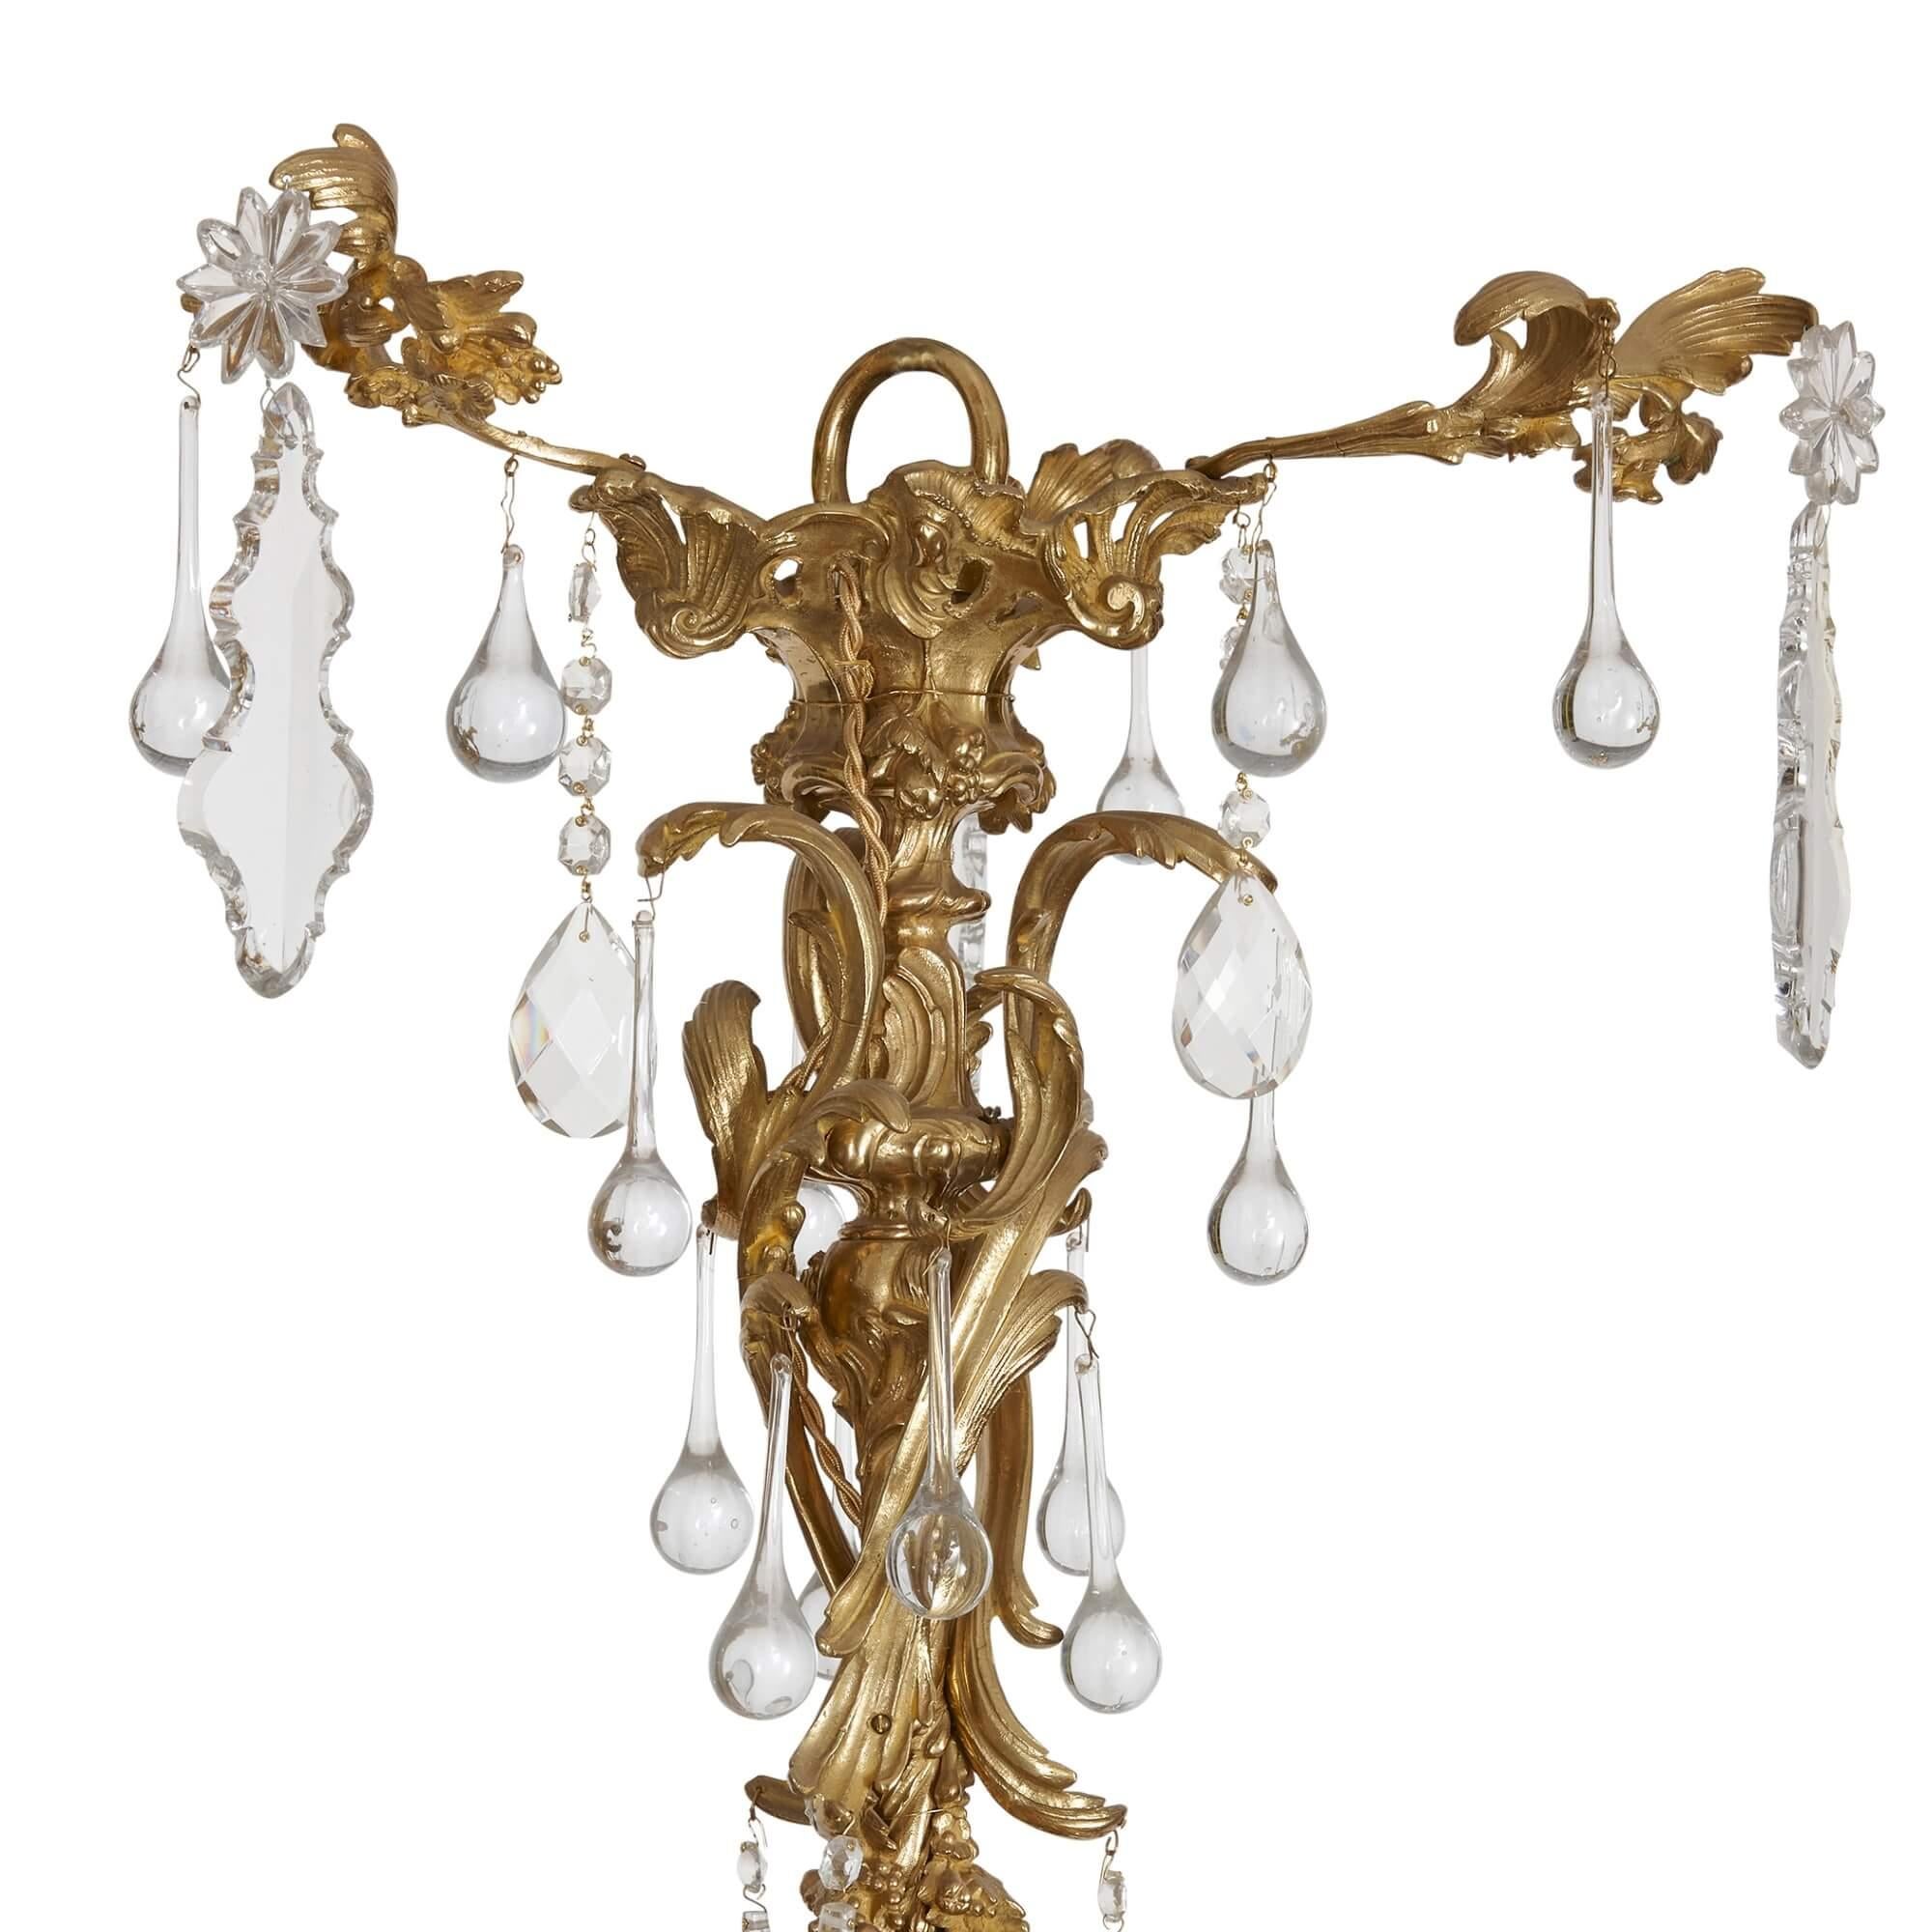 Antique ormolu and cut-glass Rococo-style chandelier 
French, 19th Century 
Height 130cm, diameter 90cm

This Rococo-style chandelier is filled with the opulent details that characterised the period. From the central ormolu stem extend twenty-four